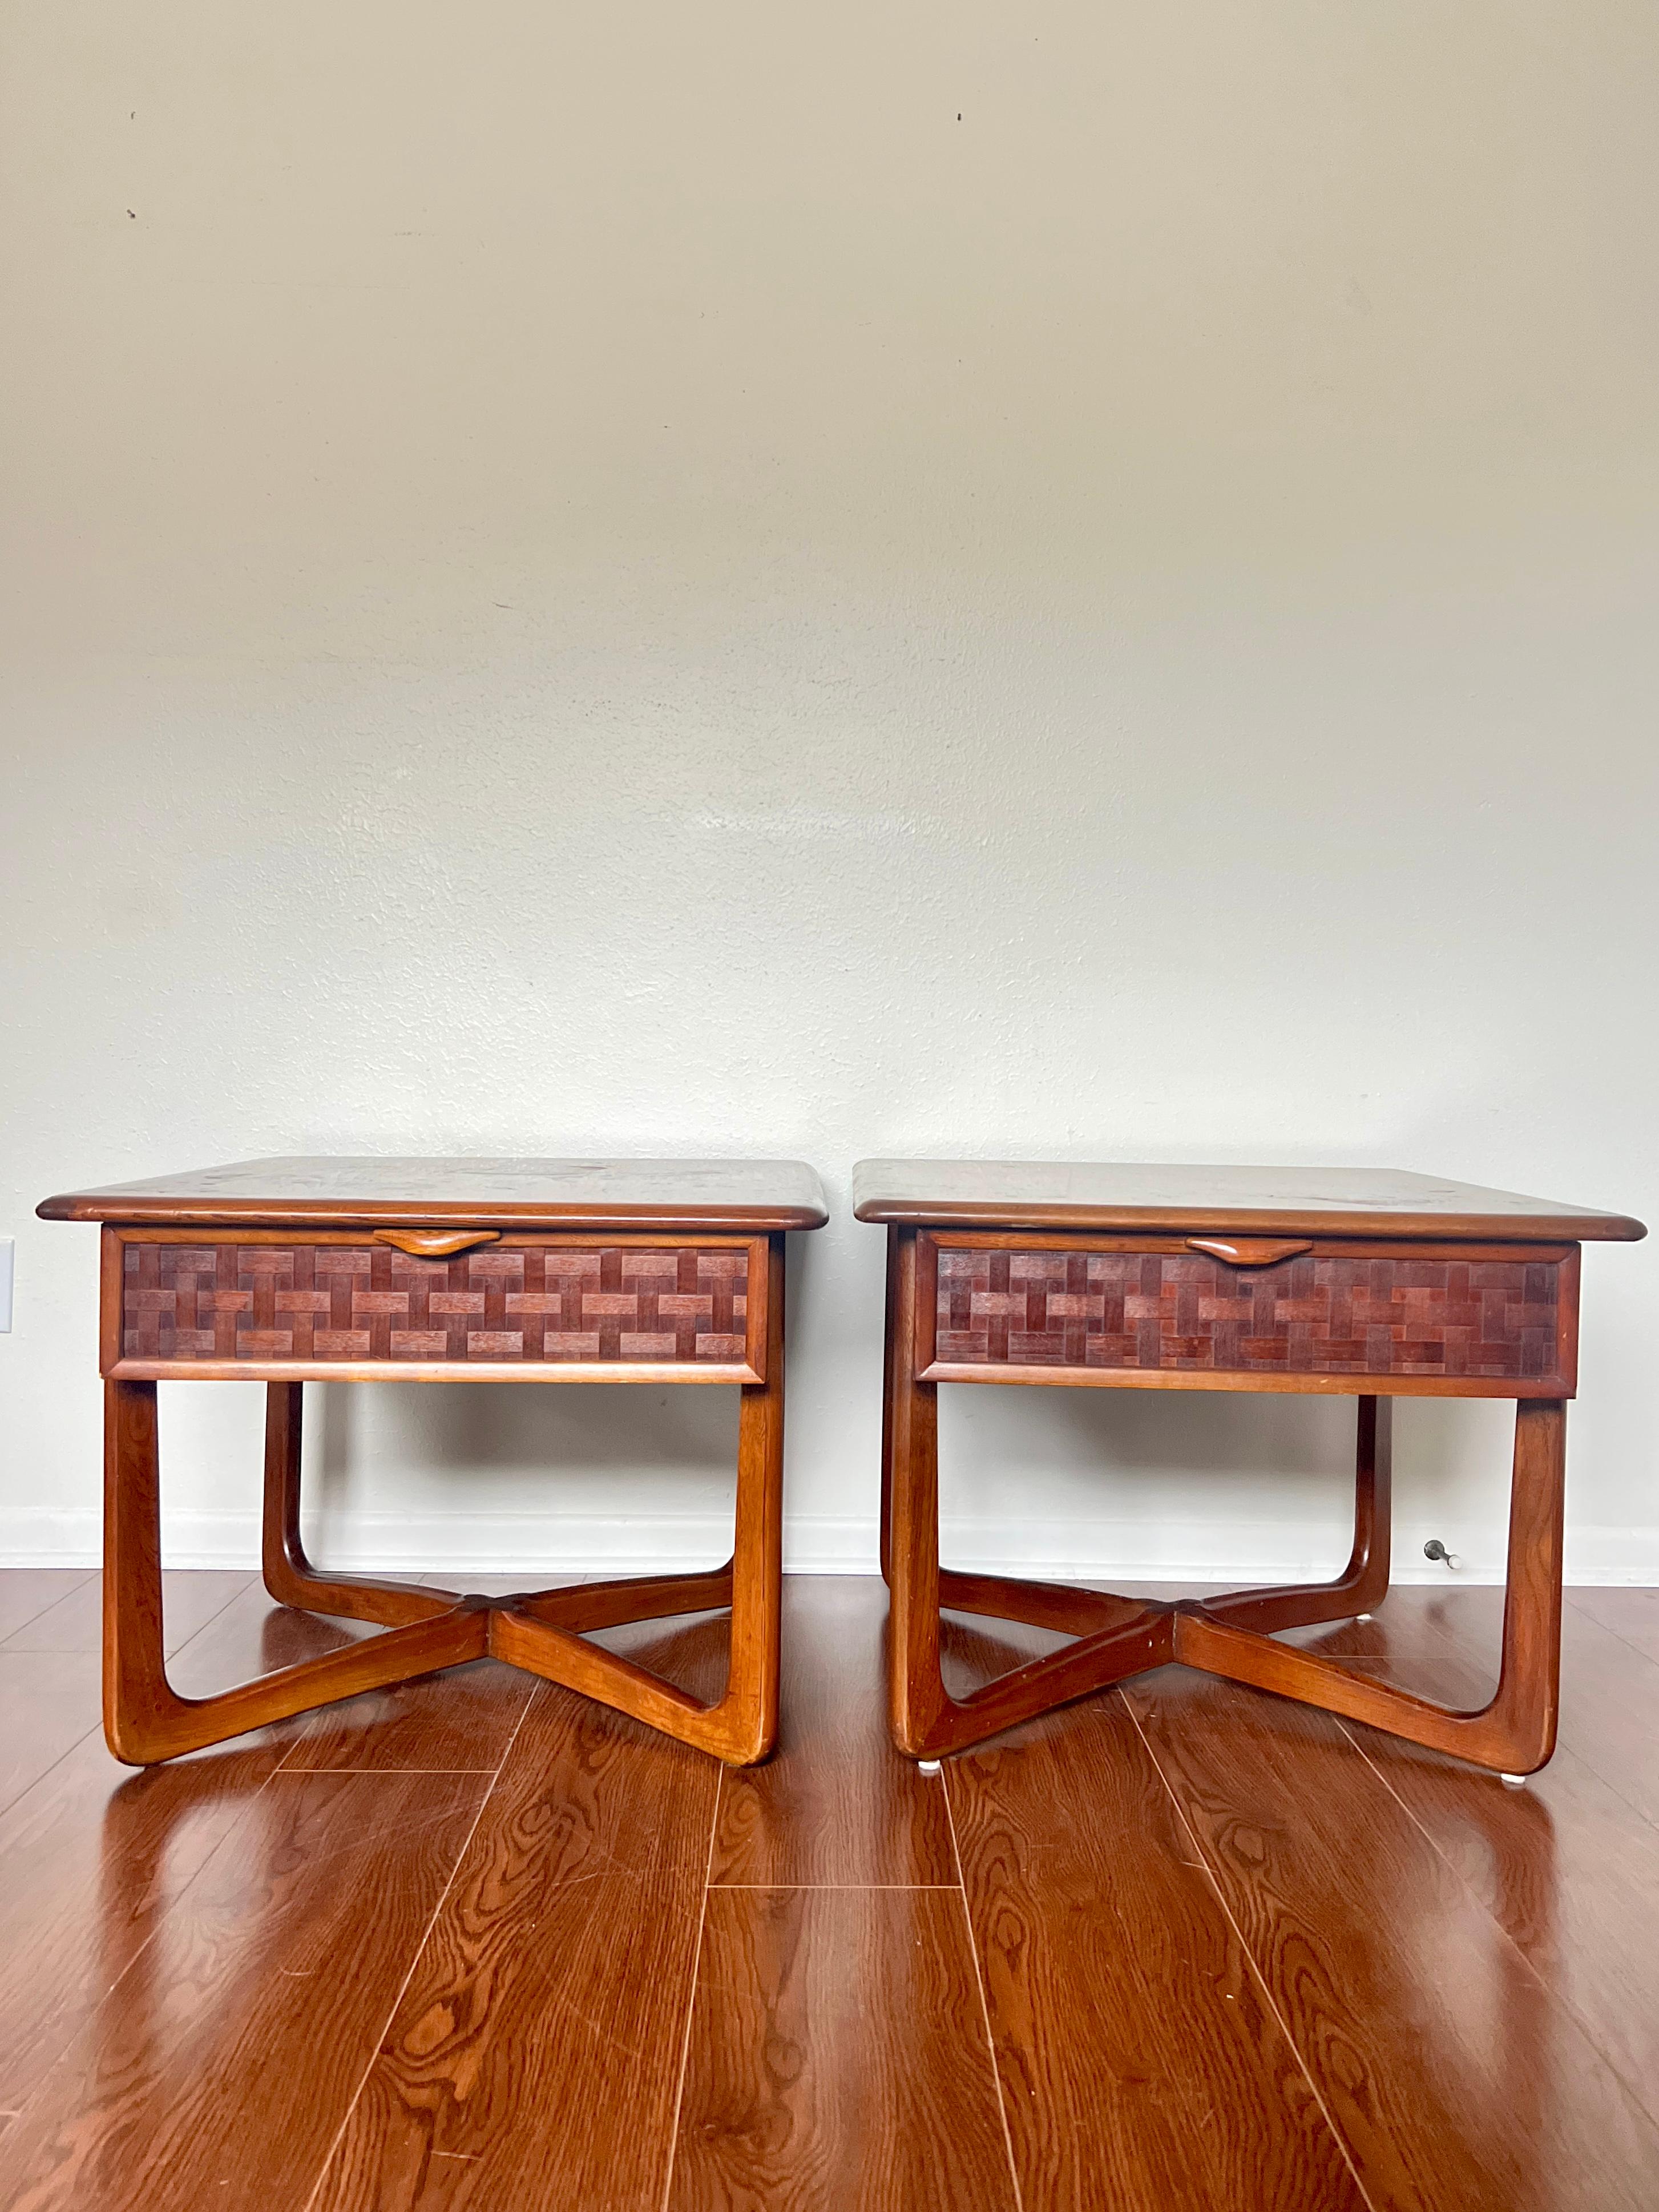 Mid-20th Century Pair of Mid-Century Modern Lane Perception Side Tables with a Cross Cross Base